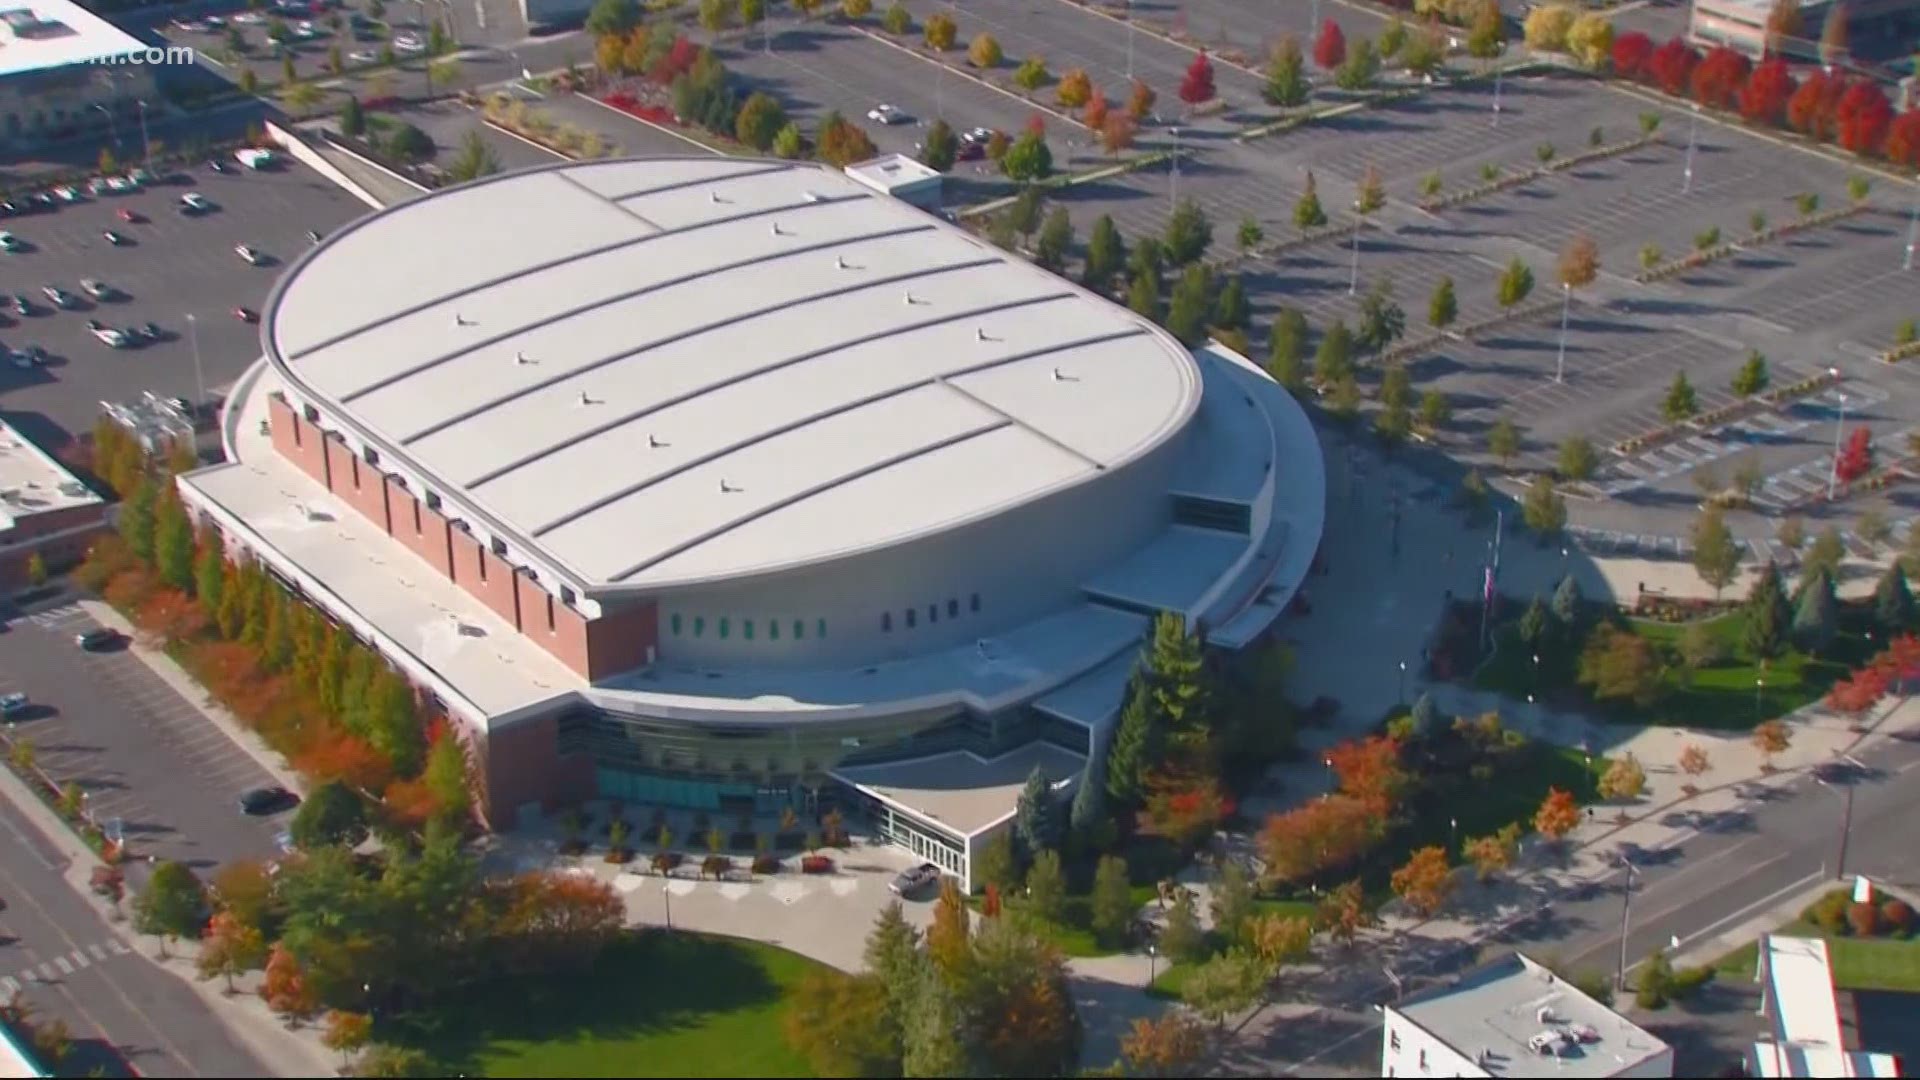 Washington Governor Jay Inslee announced a mass vaccination site at the Spokane Arena and that the state is ready to move to Phase 1B.